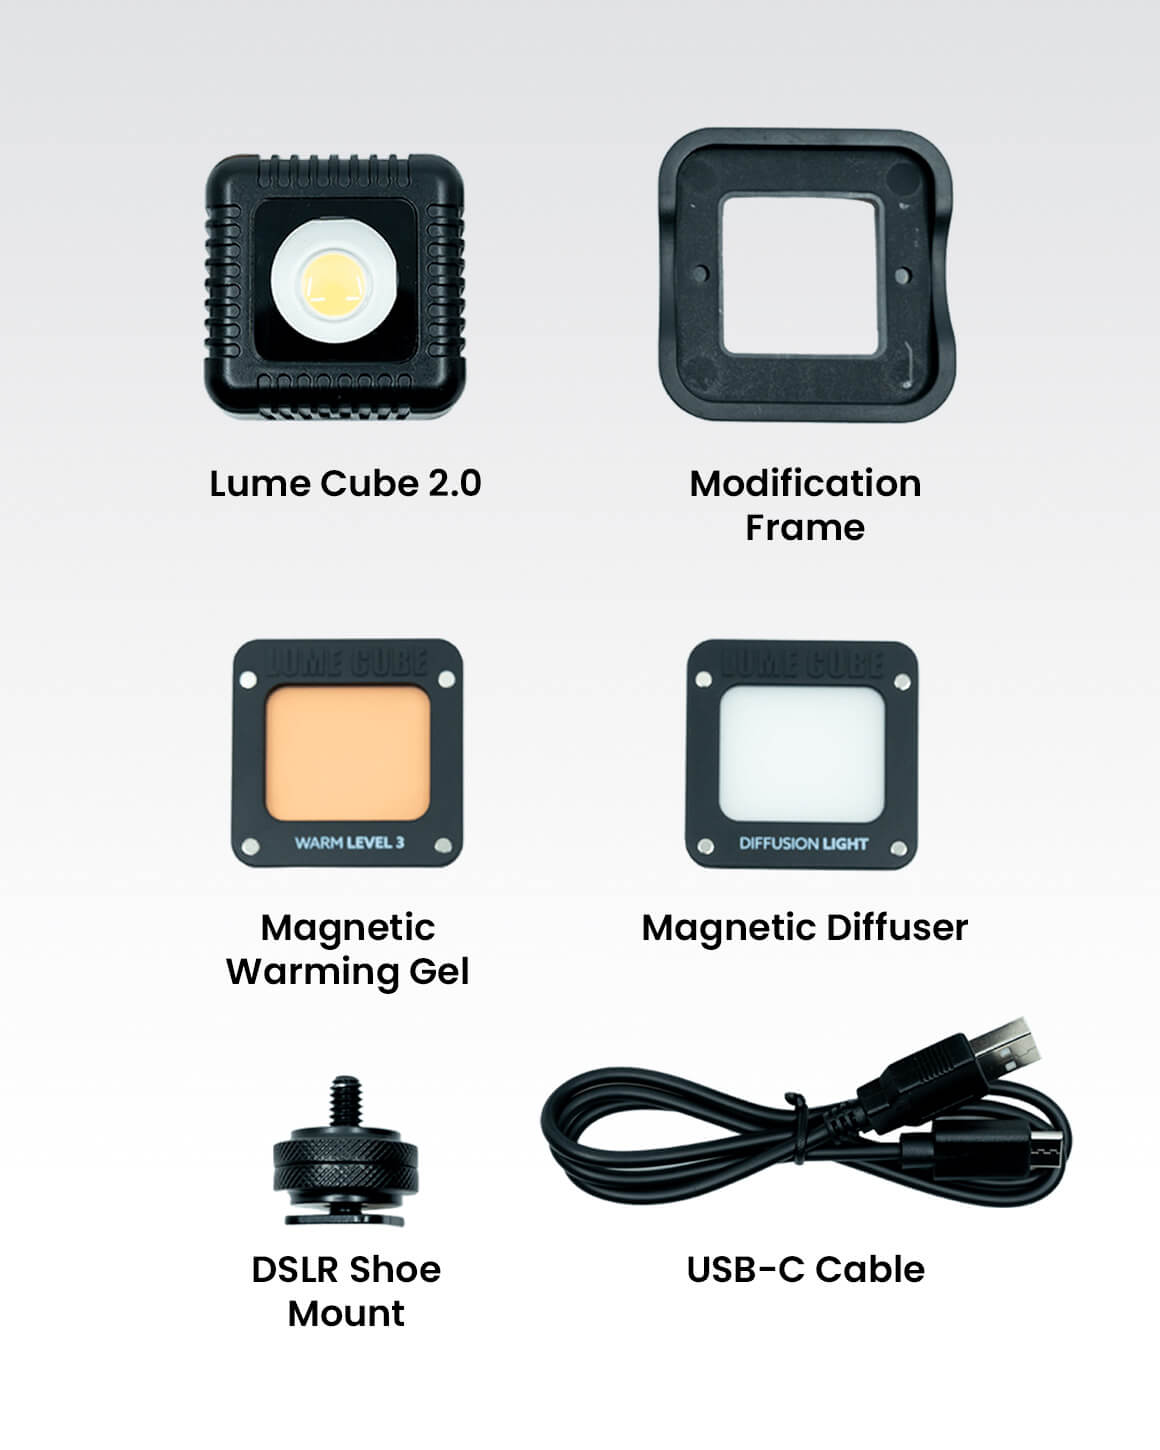 An array of accessories included with the Lume Cube 2.0